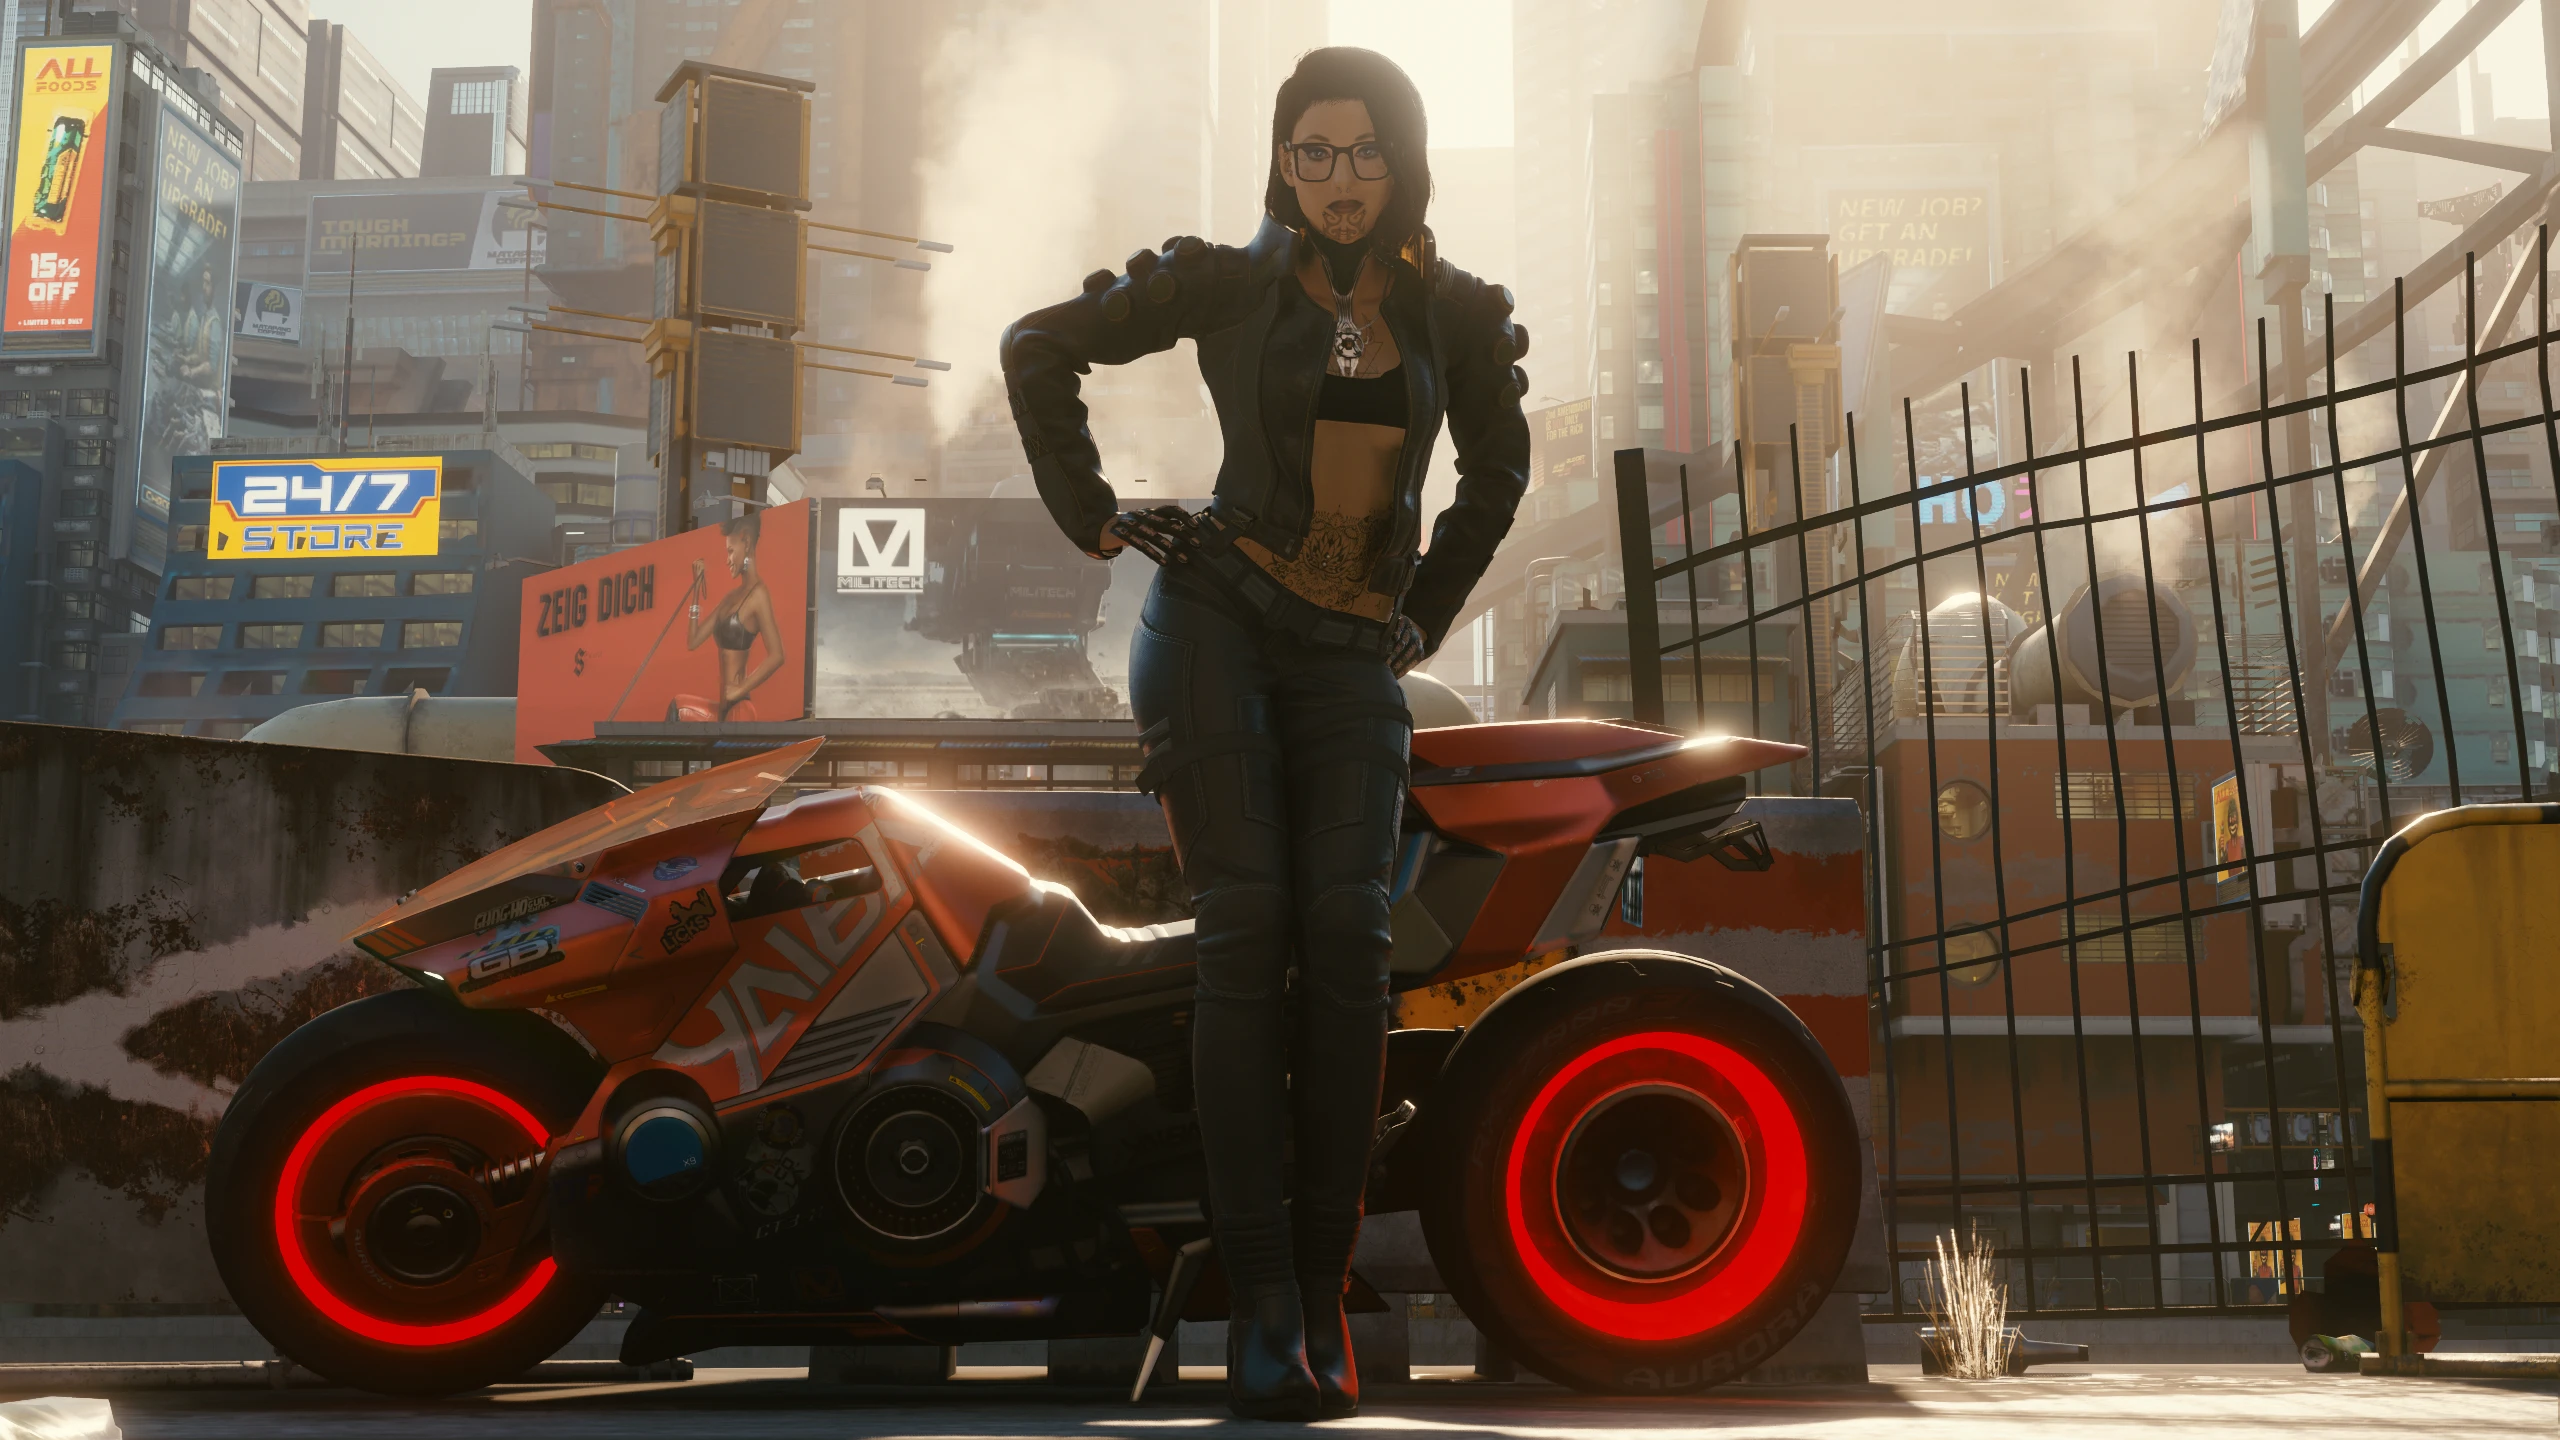 Very GitS feel to it at Cyberpunk 2077 Nexus - Mods and community